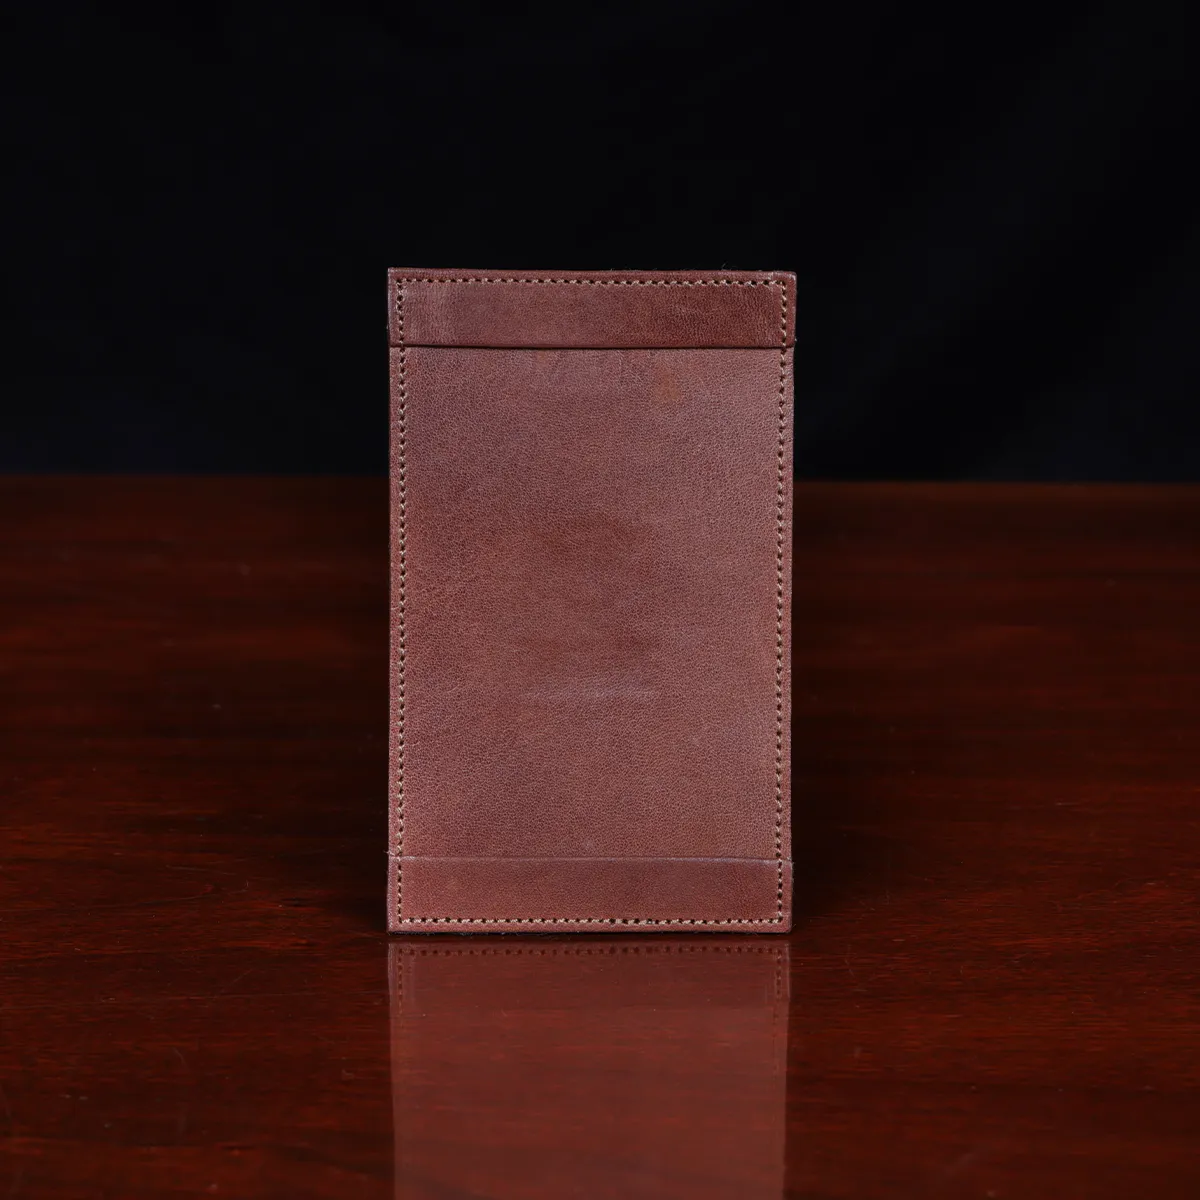 no1 vintage brown leather note card case on a wooden table